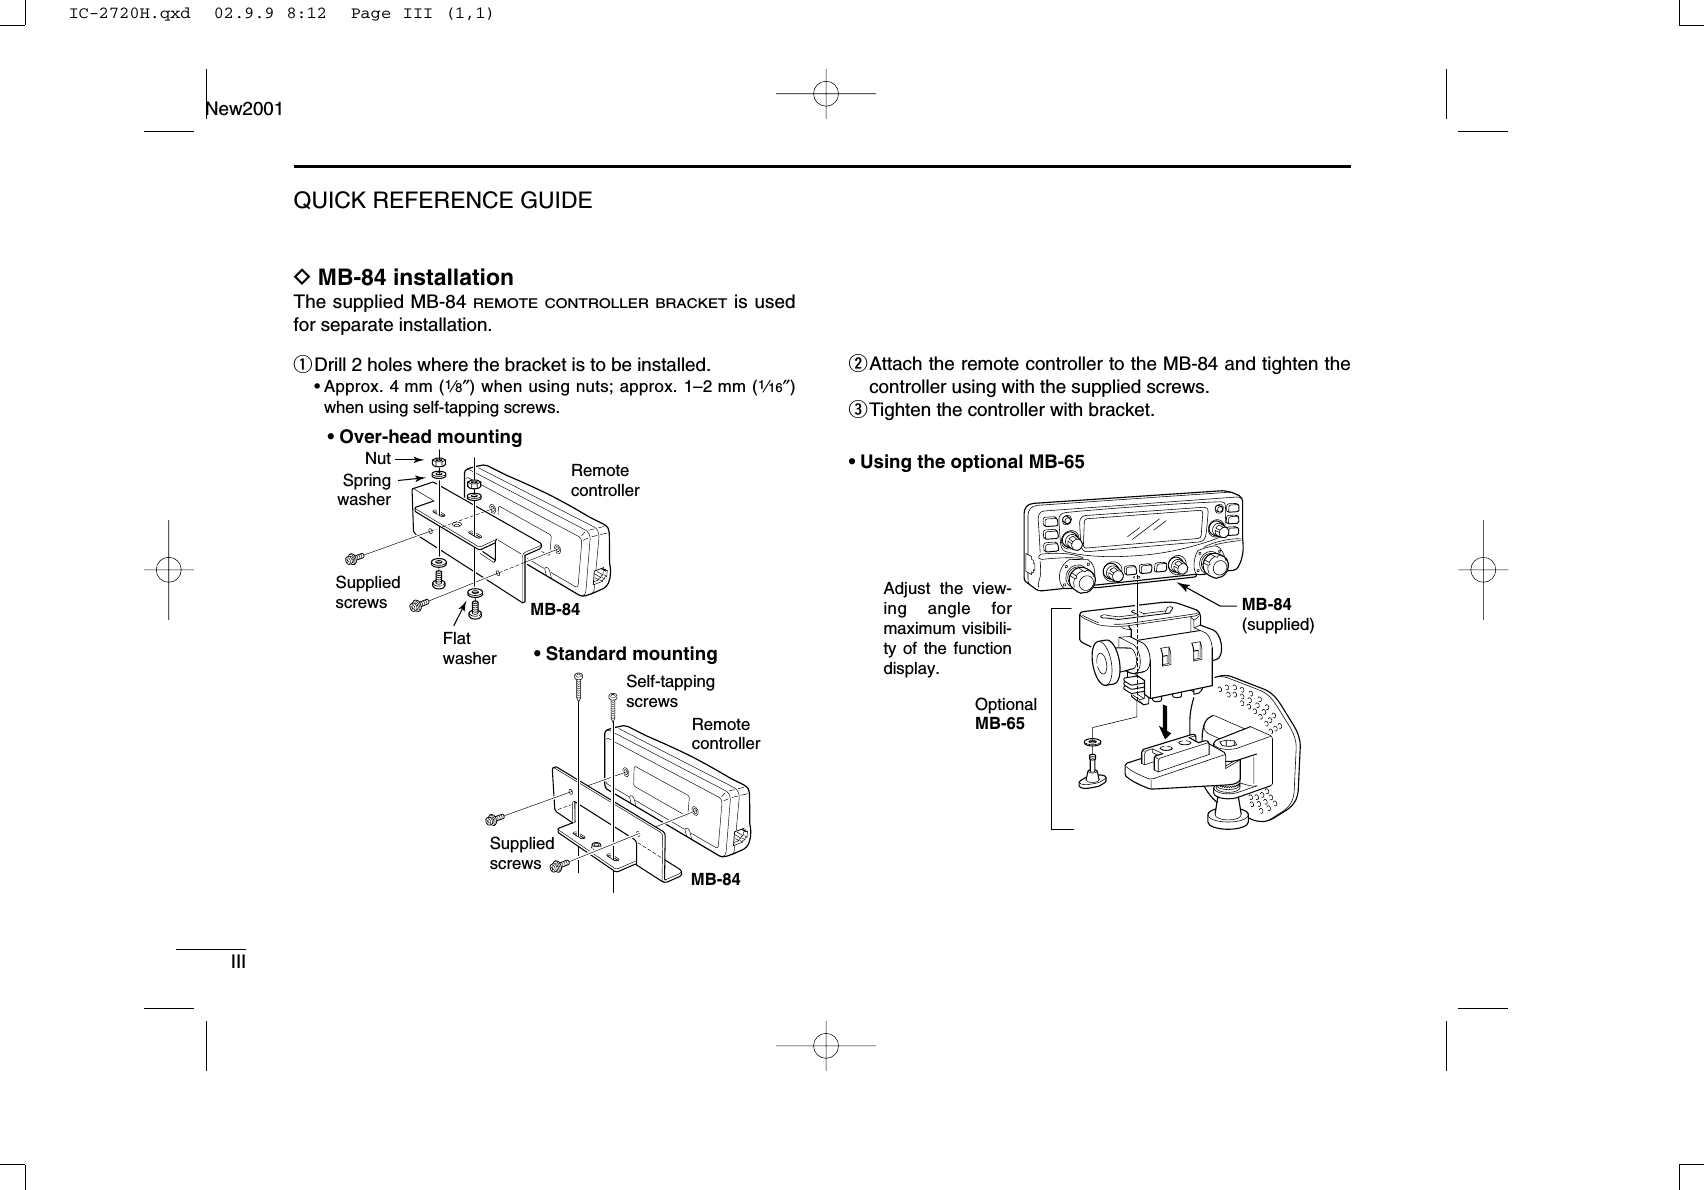 IIIQUICK REFERENCE GUIDENew2001DMB-84 installationThe supplied MB-84 REMOTE CONTROLLER BRACKETis usedfor separate installation.qDrill 2 holes where the bracket is to be installed.•Approx. 4 mm (1⁄8″) when using nuts; approx. 1–2mm (1⁄16″)when using self-tapping screws.wAttach the remote controller to the MB-84 and tighten thecontroller using with the supplied screws.eTighten the controller with bracket.• Using the optional MB-65MB-84(supplied)OptionalMB-65Adjust the view-ing angle for maximum visibili-ty of the function display.MB-84MB-84• Over-head mounting• Standard mountingRemotecontrollerSuppliedscrewsSuppliedscrewsSelf-tappingscrewsRemotecontrollerNutSpringwasherFlatwasherIC-2720H.qxd  02.9.9 8:12  Page III (1,1)